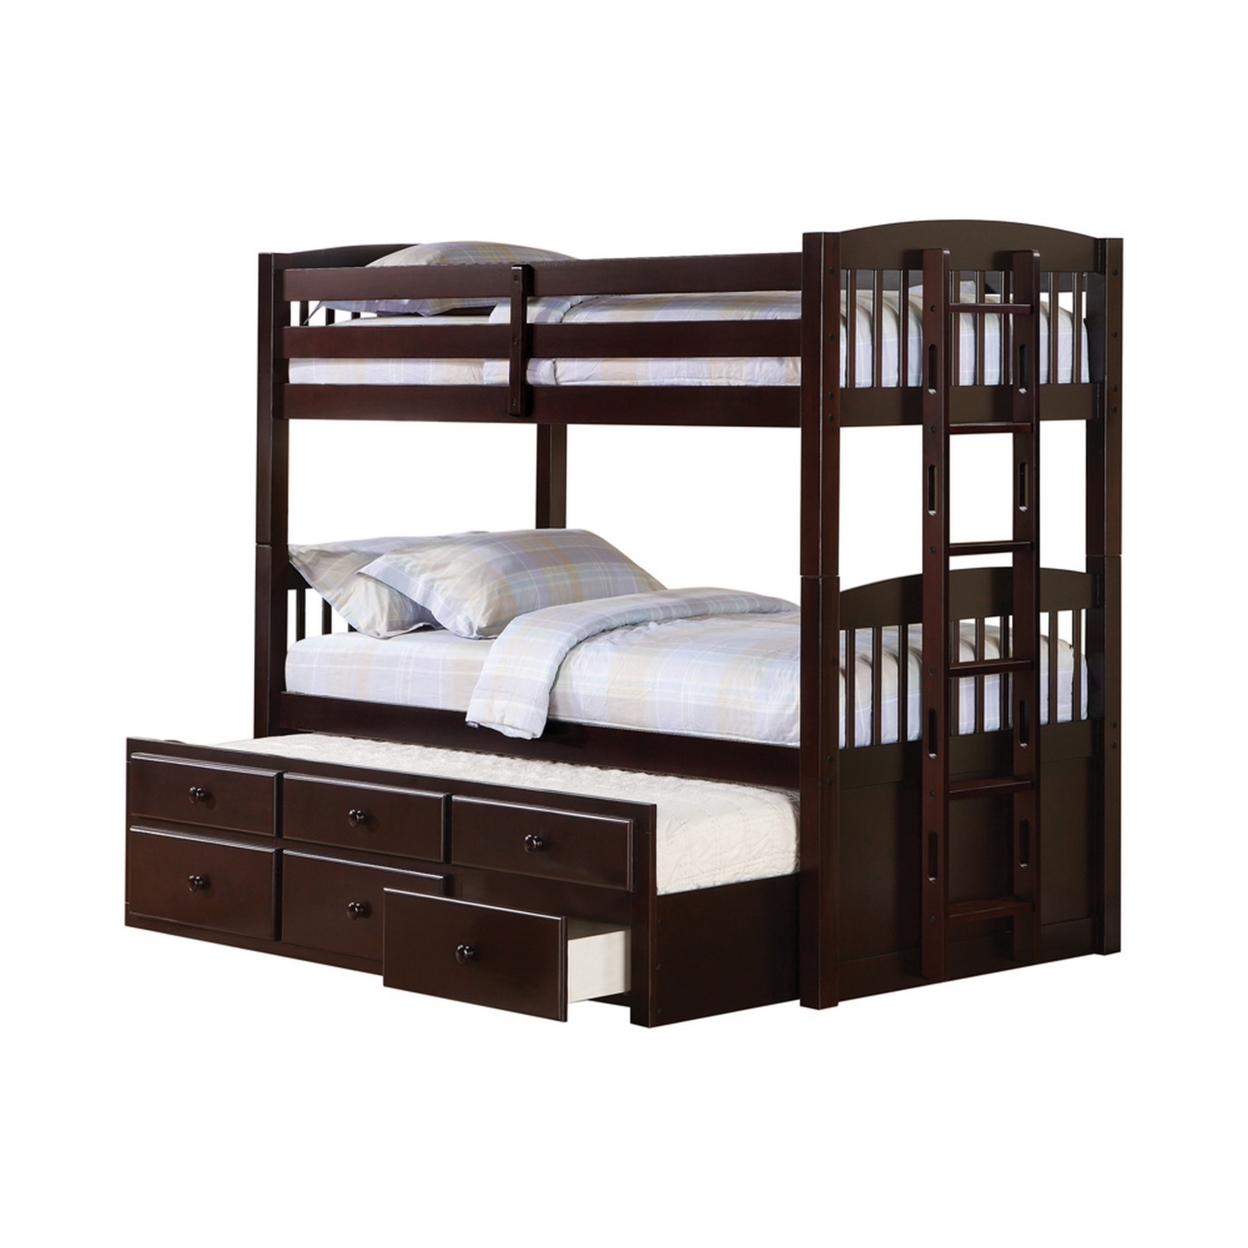 Wooden Twin Over Twin Bunk Bed With Guard Rails And Bottom Drawers, Brown- Saltoro Sherpi